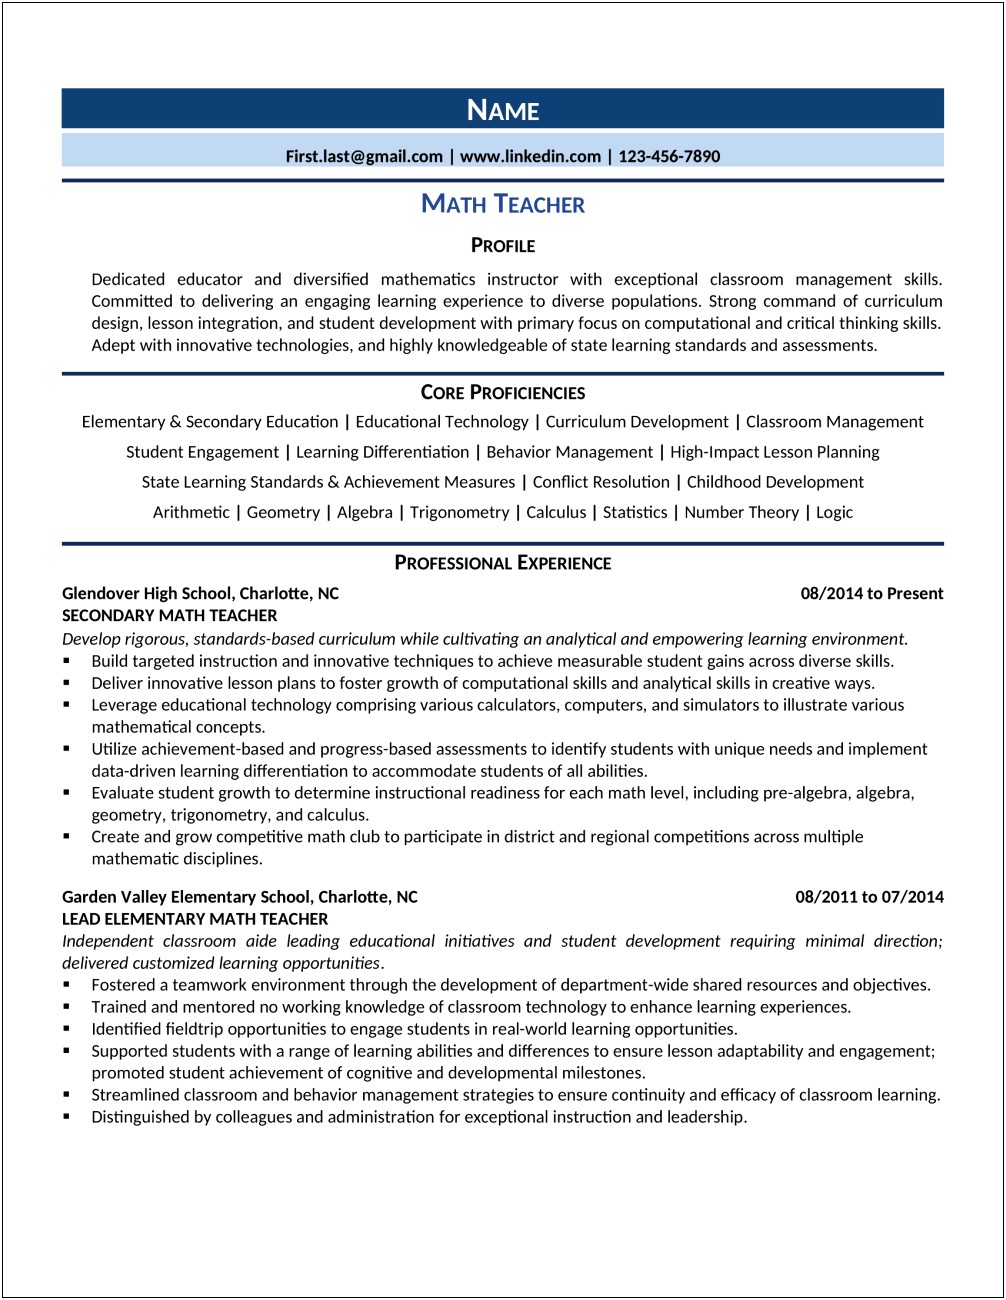 Resume For Middle School Math Teaxher